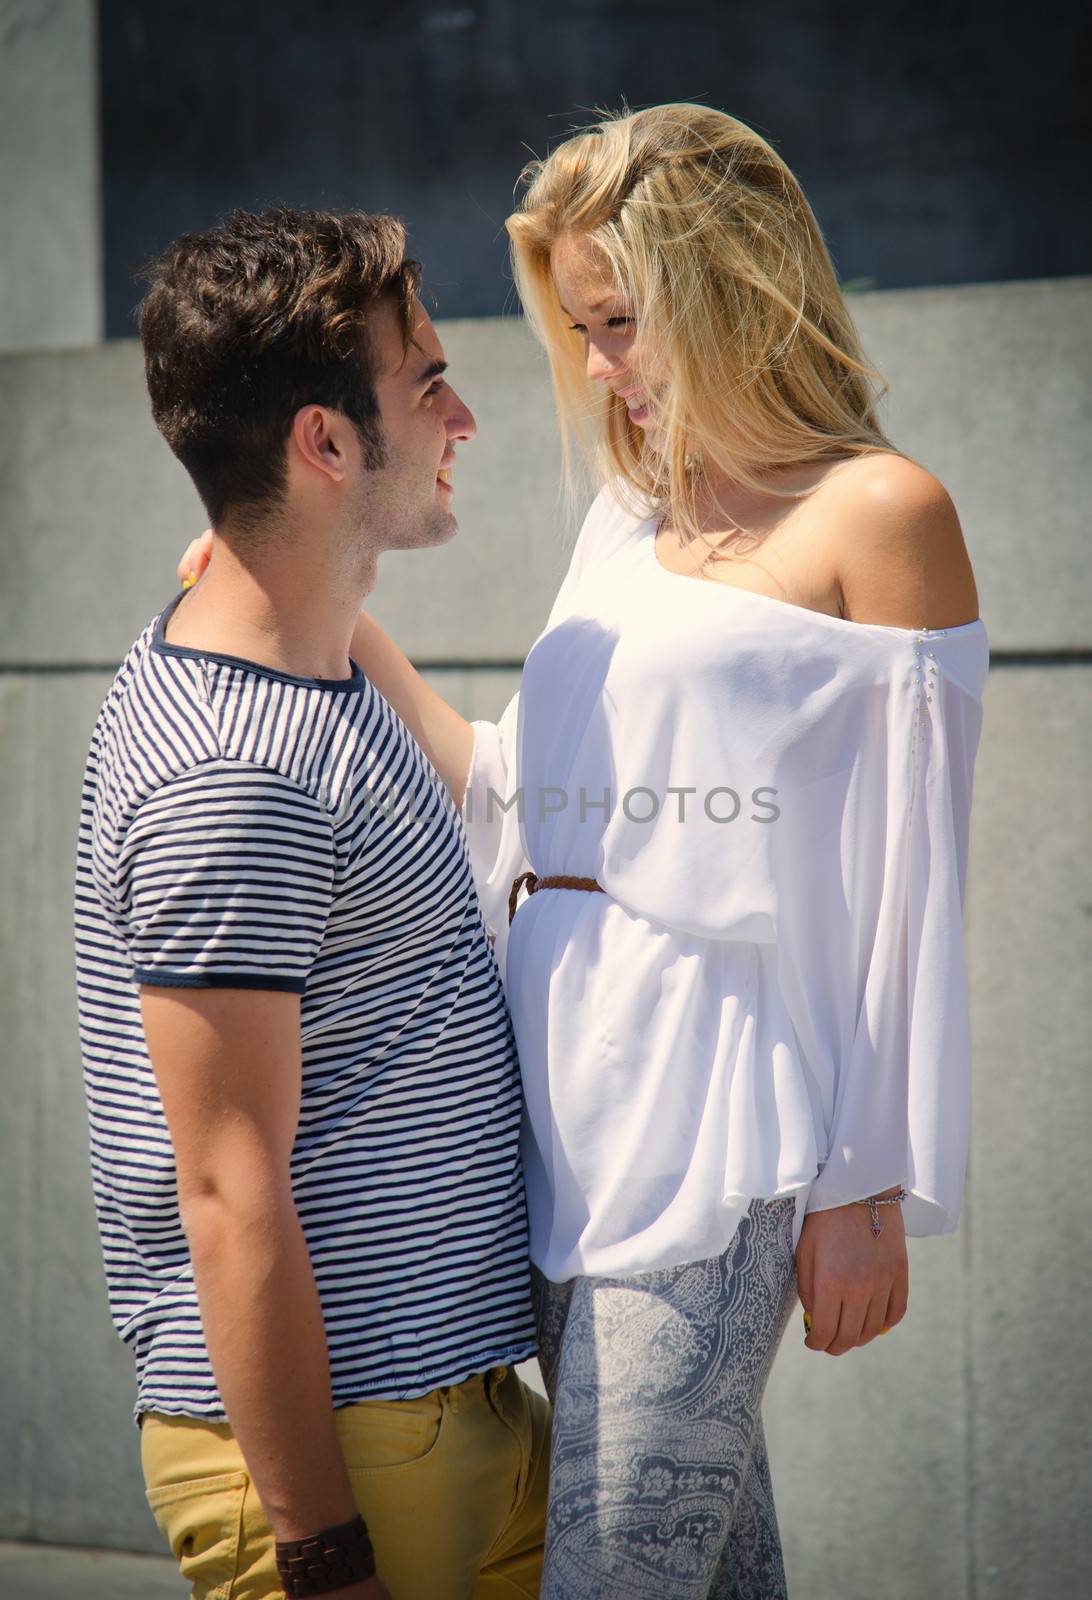 Romantic couple looking in each other's eyes smiling outdoors